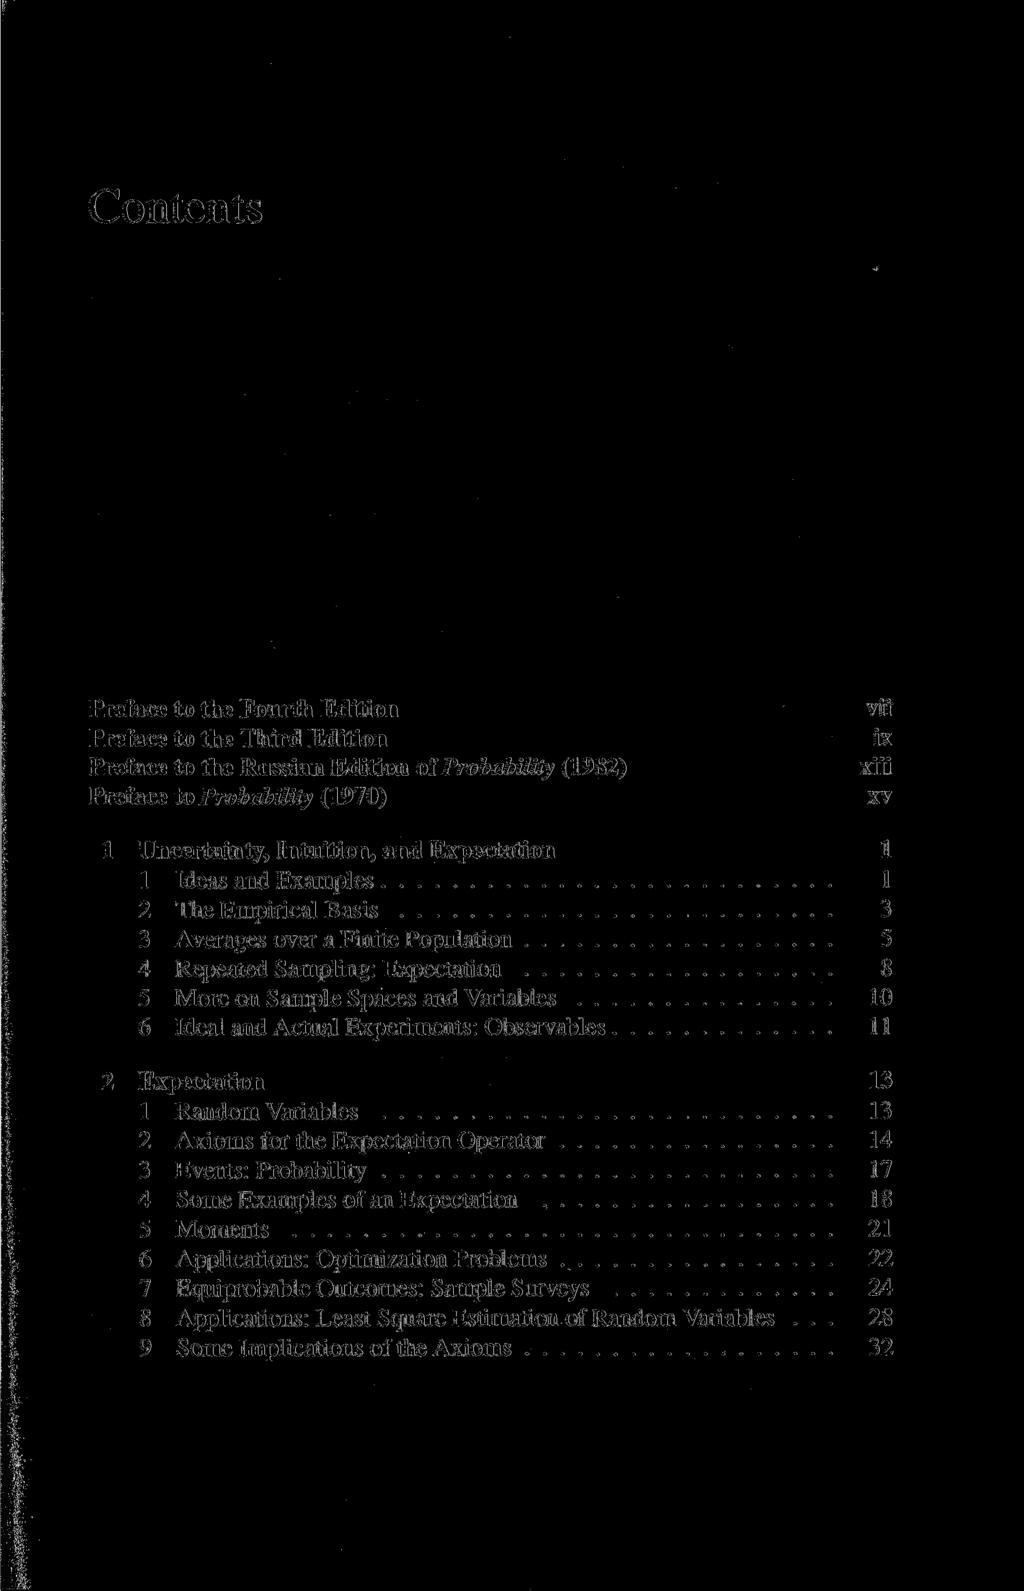 Contents Preface to the Fourth Edition Preface to the Third Edition Preface to the Russian Edition of Probability (1982) Preface to Probability (1970) vii ix xiii xv 1 Uncertainty, Intuition, and